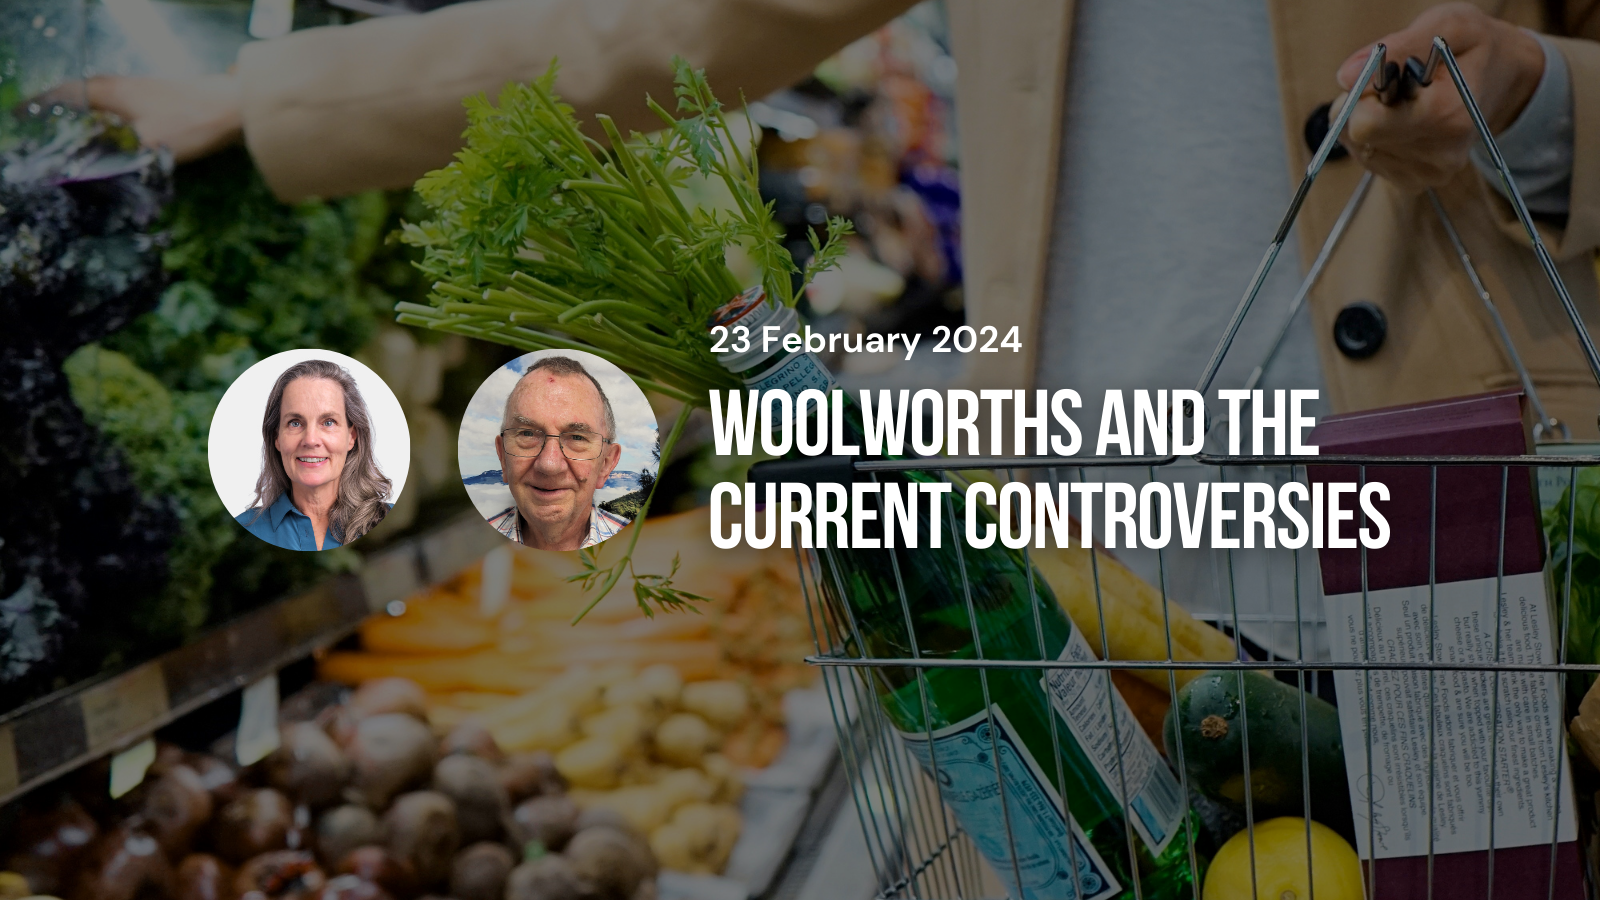 Woolworths and the current controversies